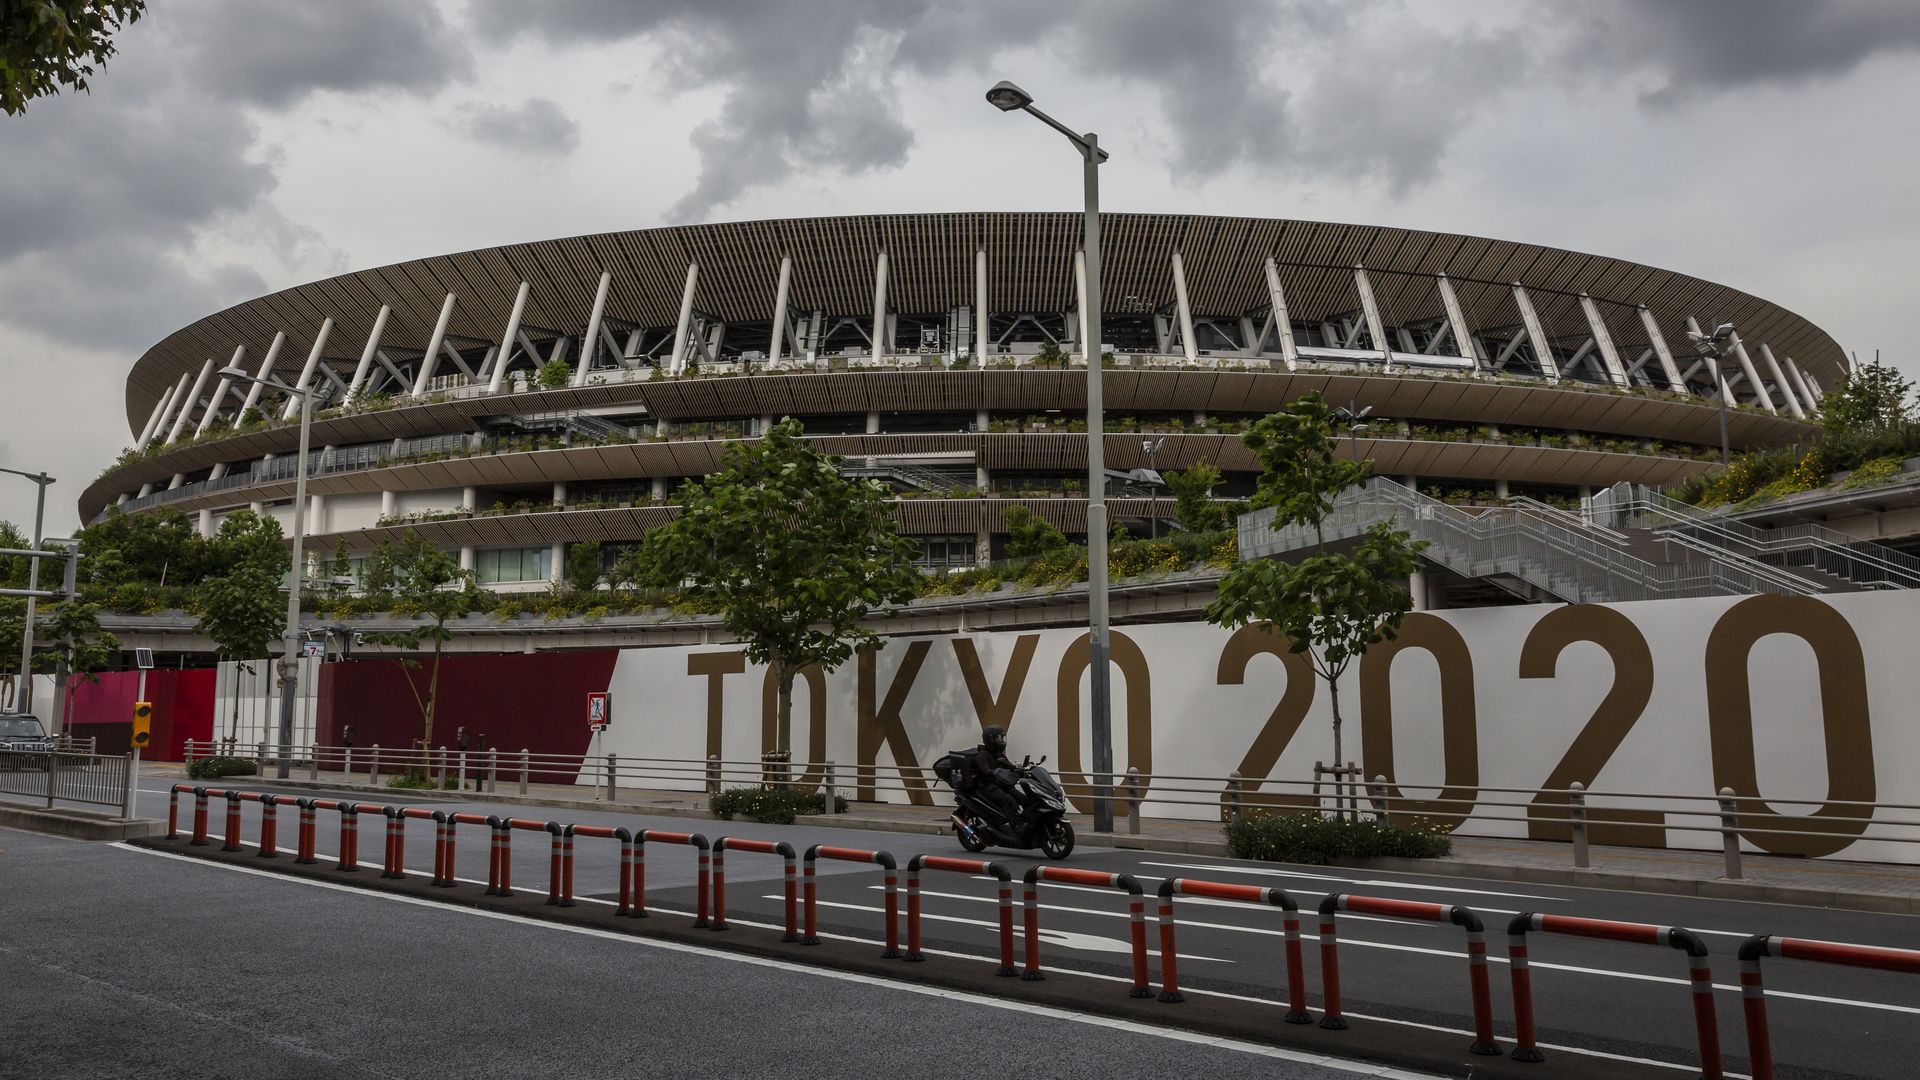 A sign that says "Tokyo 2020" outside a colosseum 